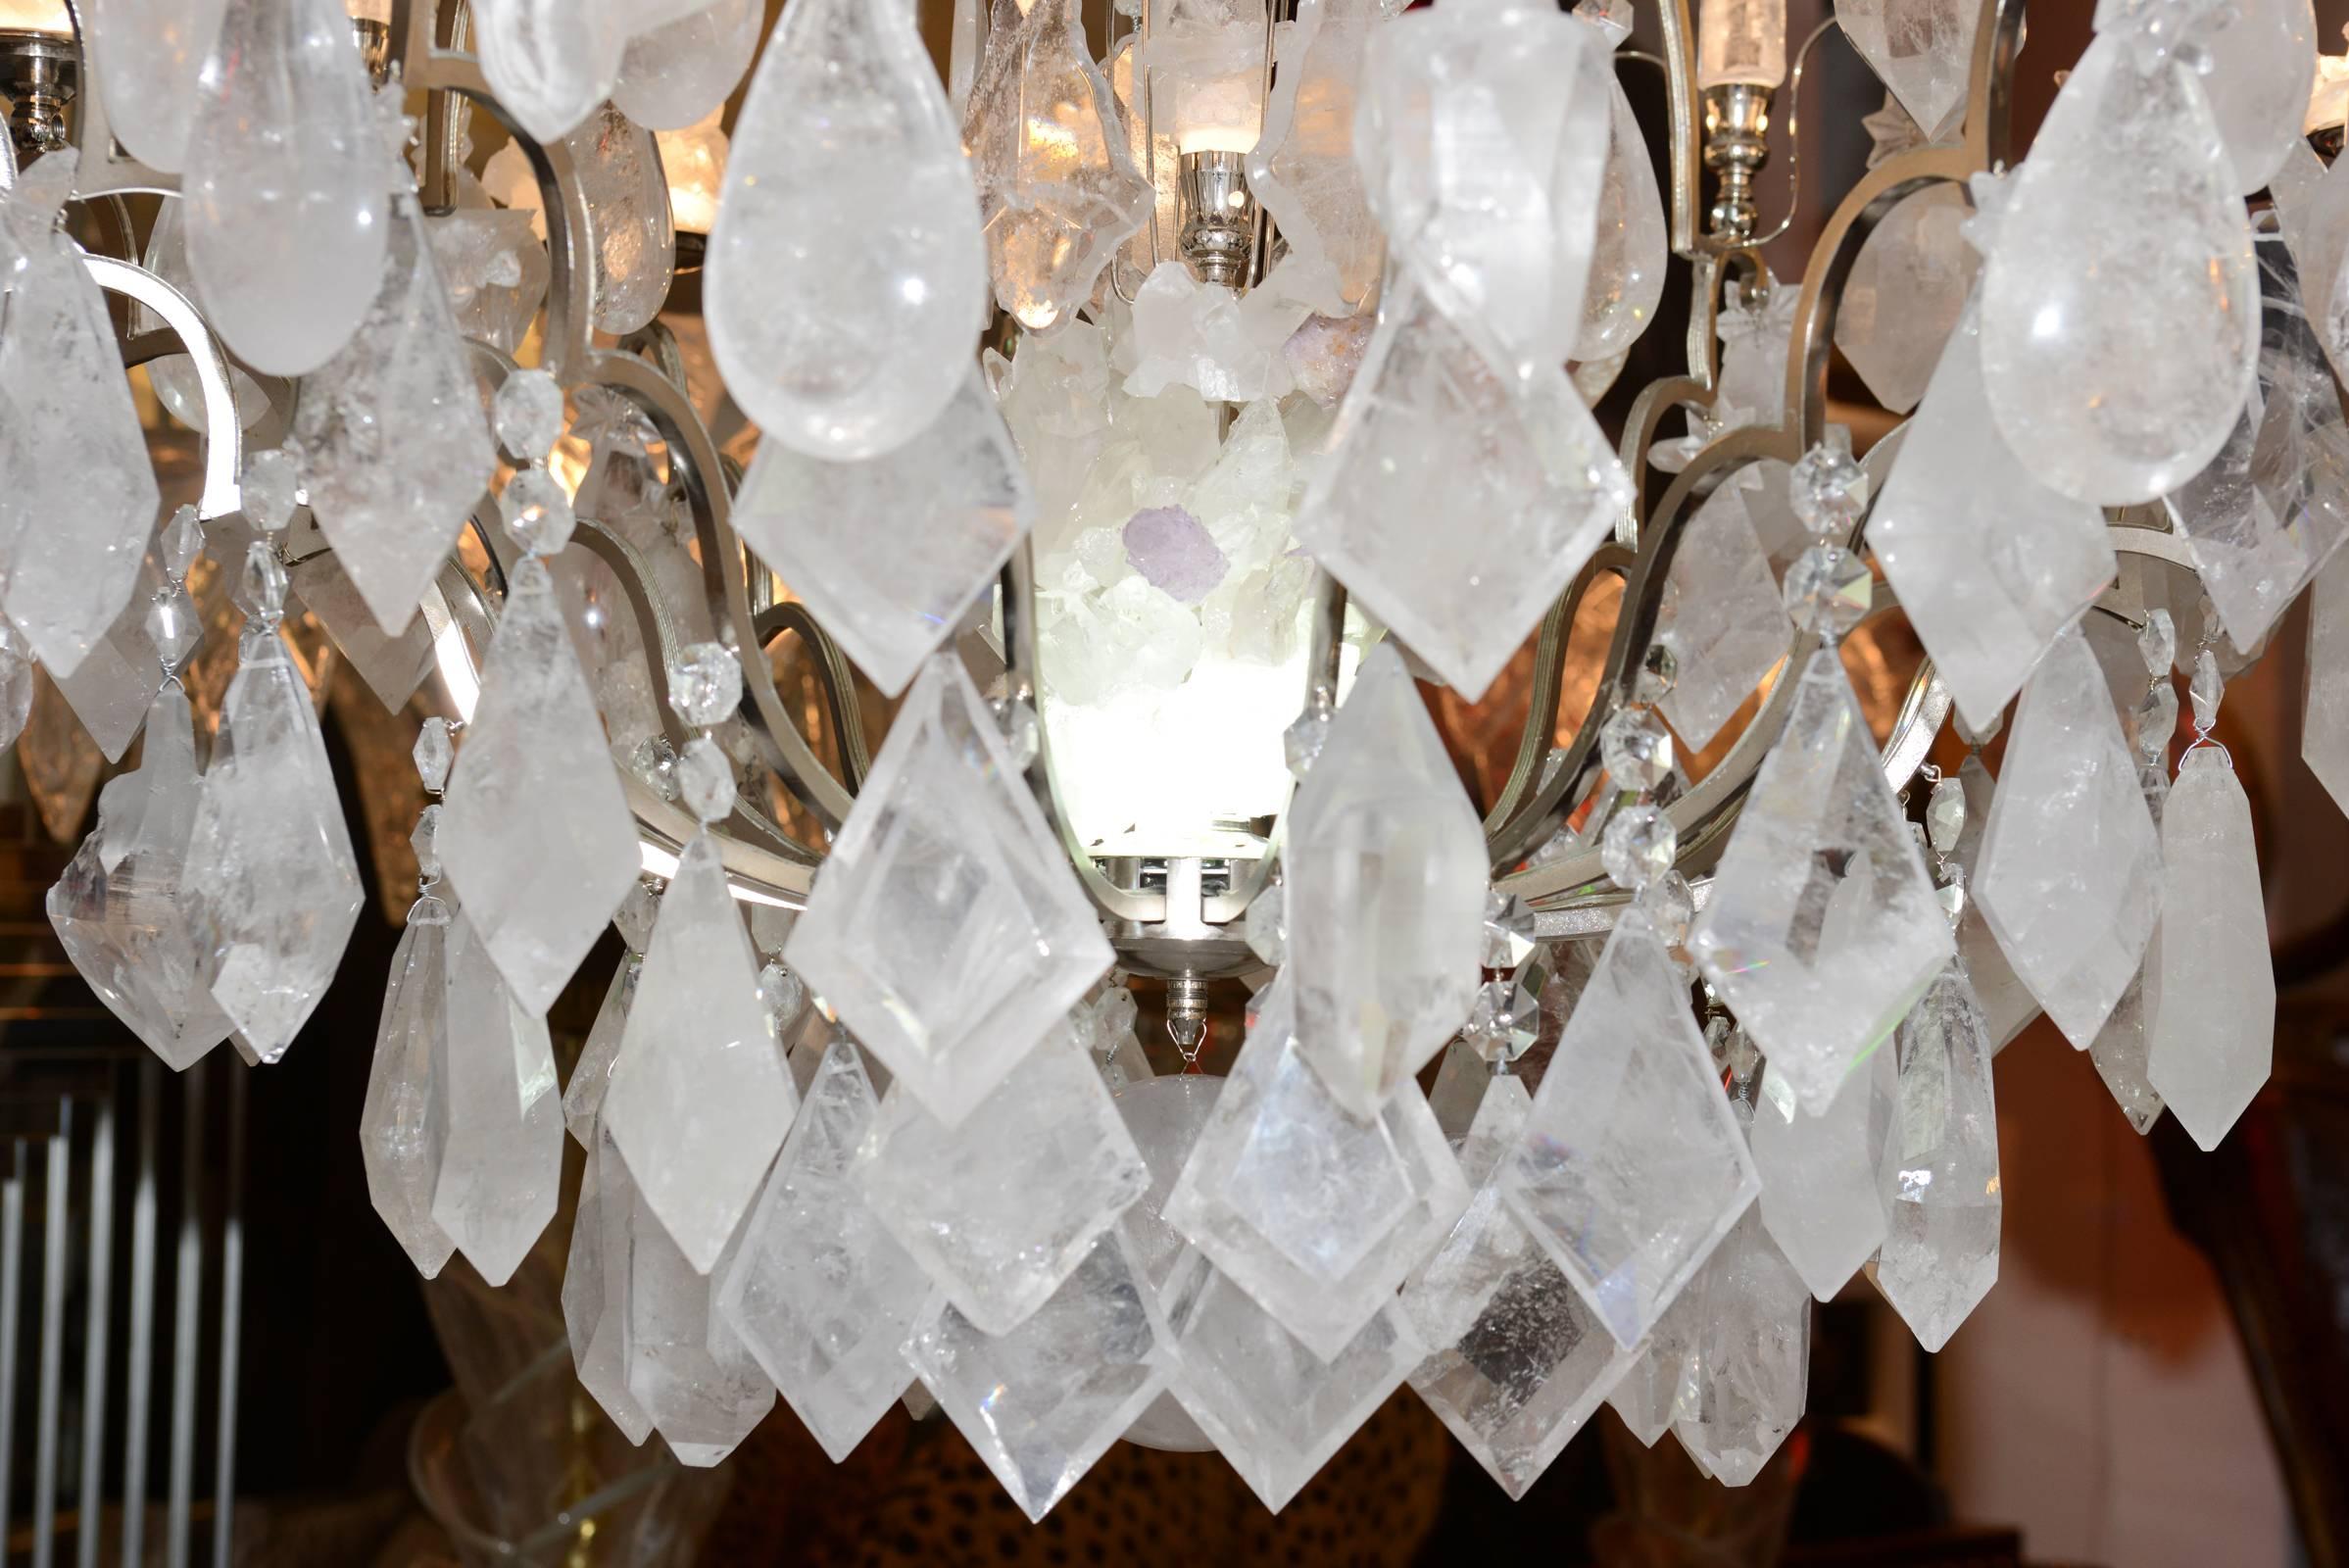 Chandelier pure crystal rock, a masterpiece in rock crystal, made in 2017.
Re-visited 18th century chandelier composed of classically cut pendants, 
half-cut natural crystals and natural druces. It brings together the 
wonders of art crafts and